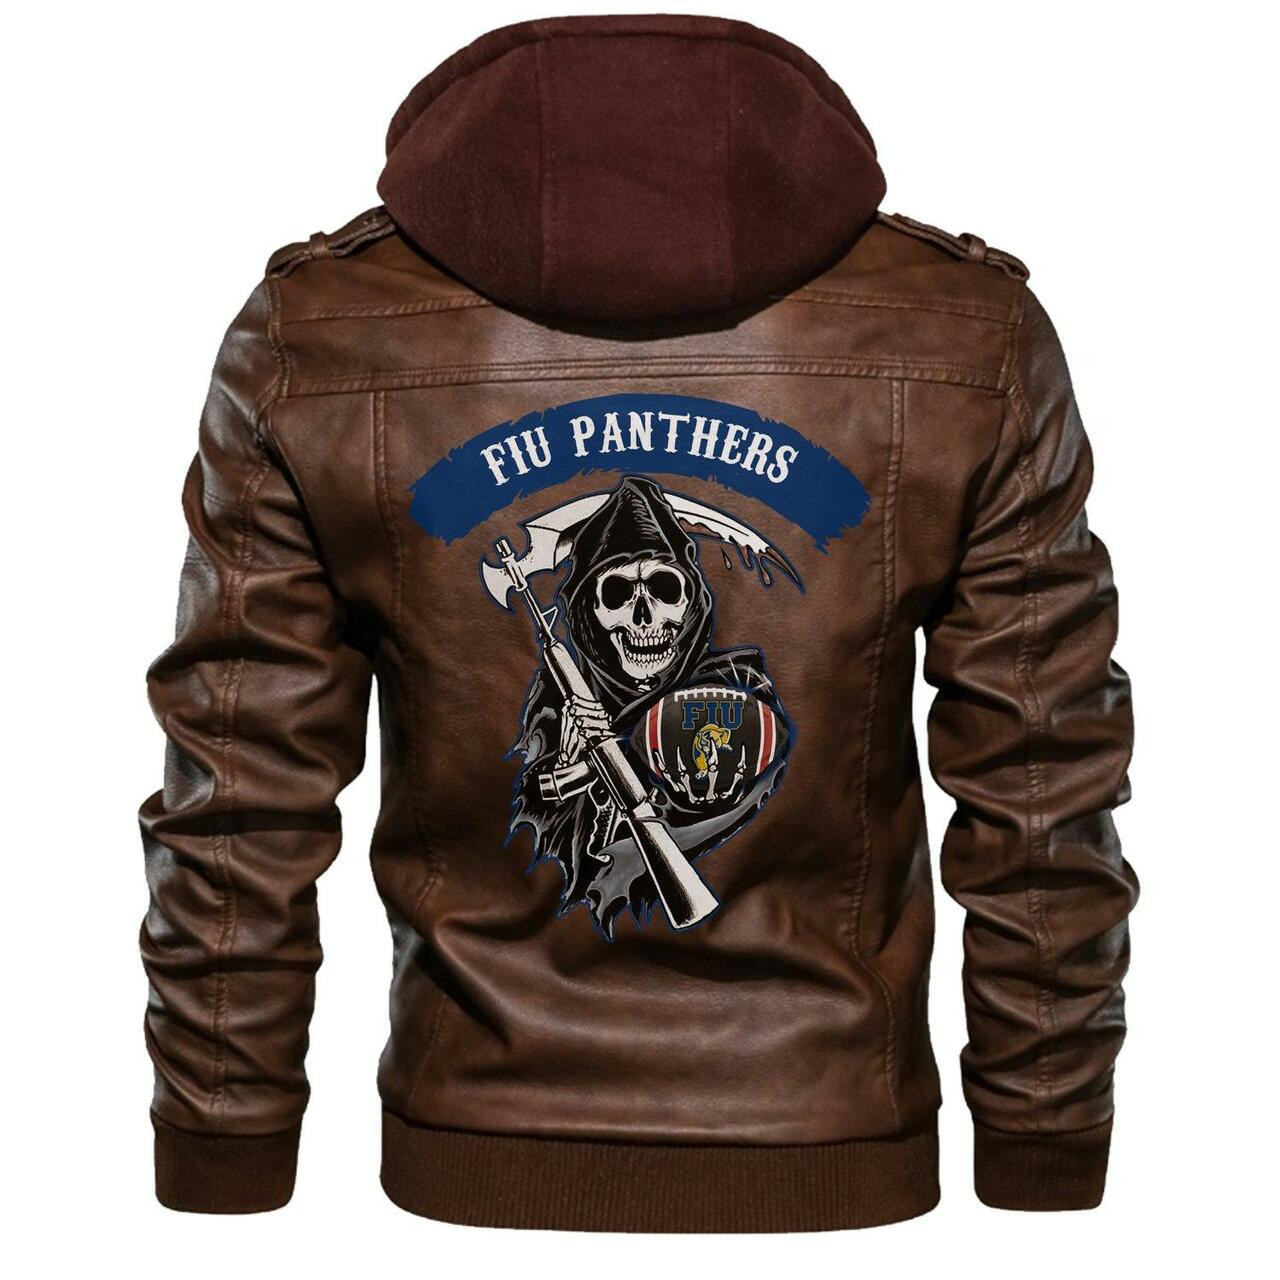 If you're looking for a new leather jacket this season - keep reading! 57